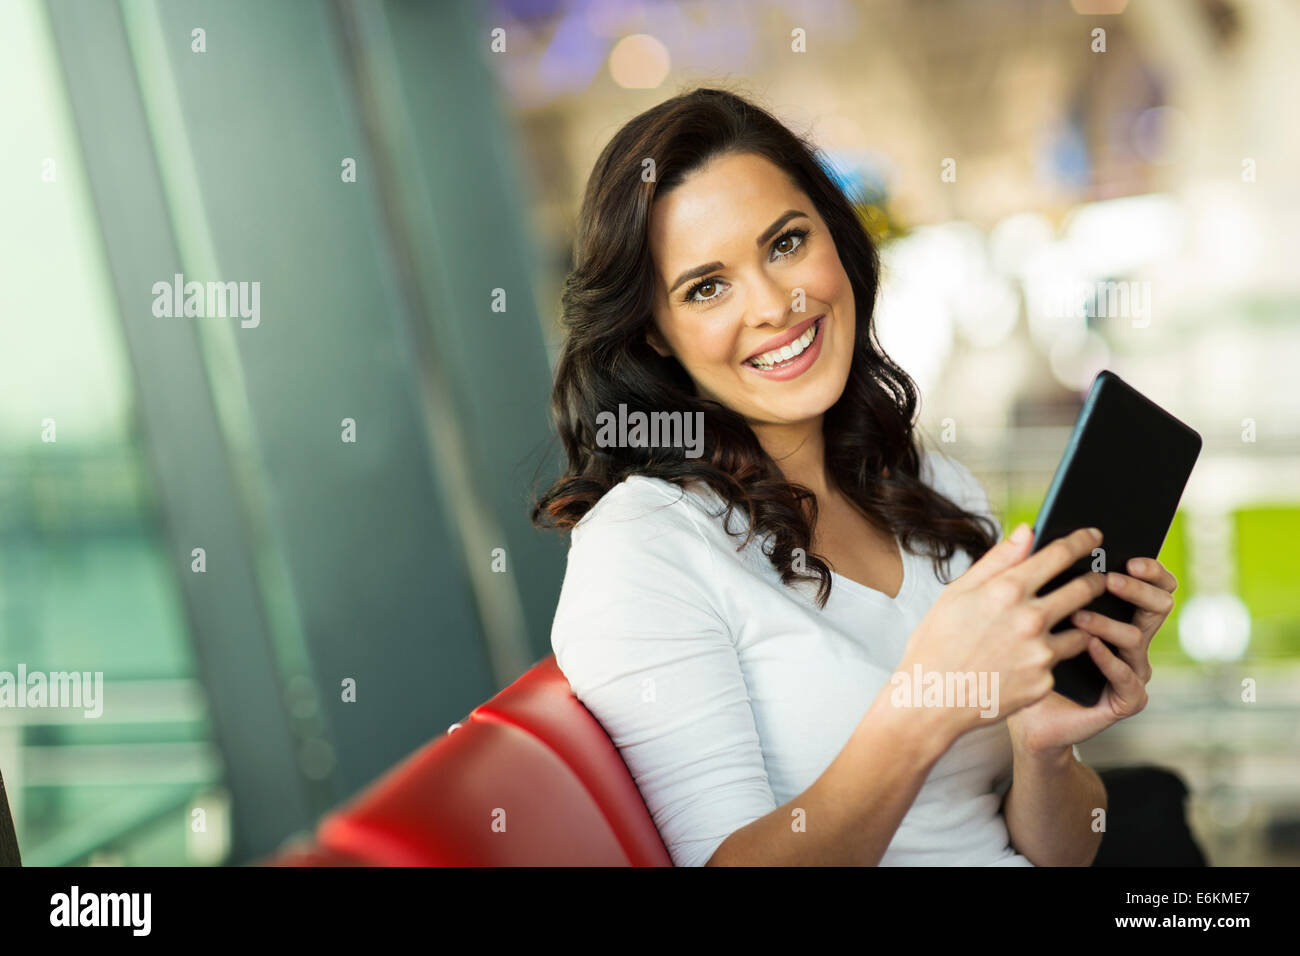 attractive woman holding tablet computer at airport Stock Photo